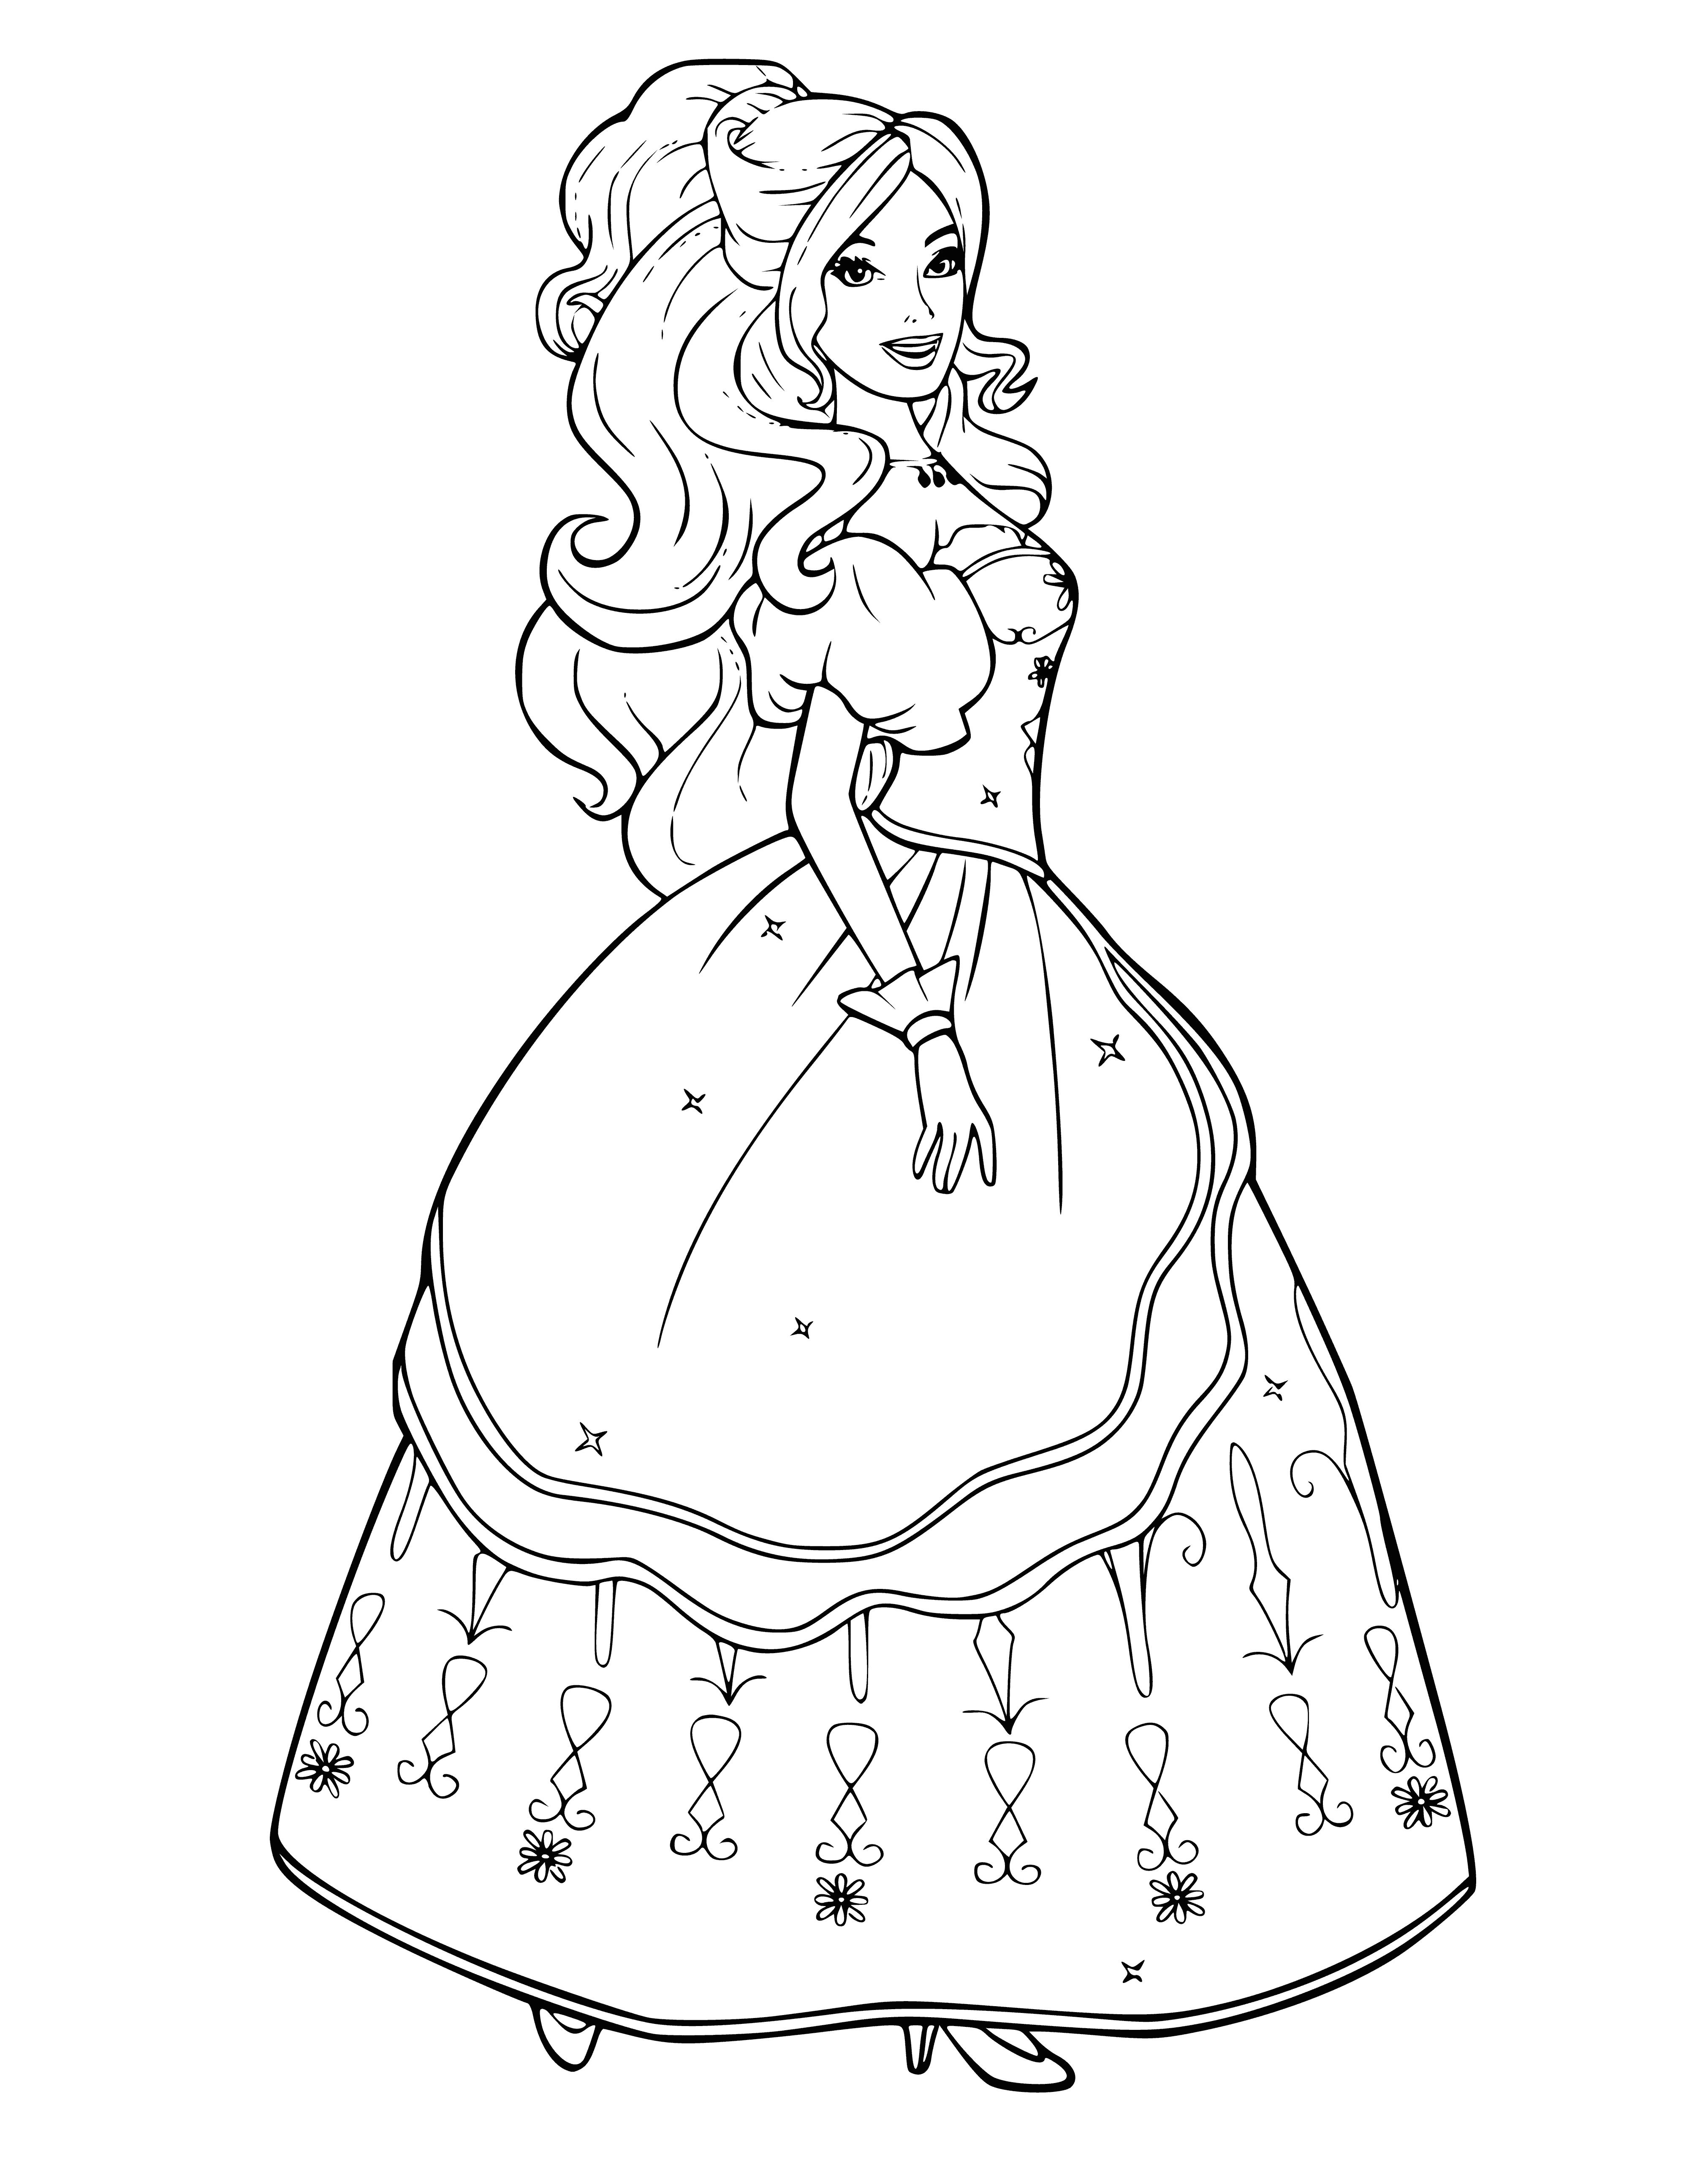 coloring page: A doll stands on a pink stage, wearing a pink dress and holding a pink microphone. Its blonde hair adds to the flowers and hearts on the page. #coloringpage #cutie